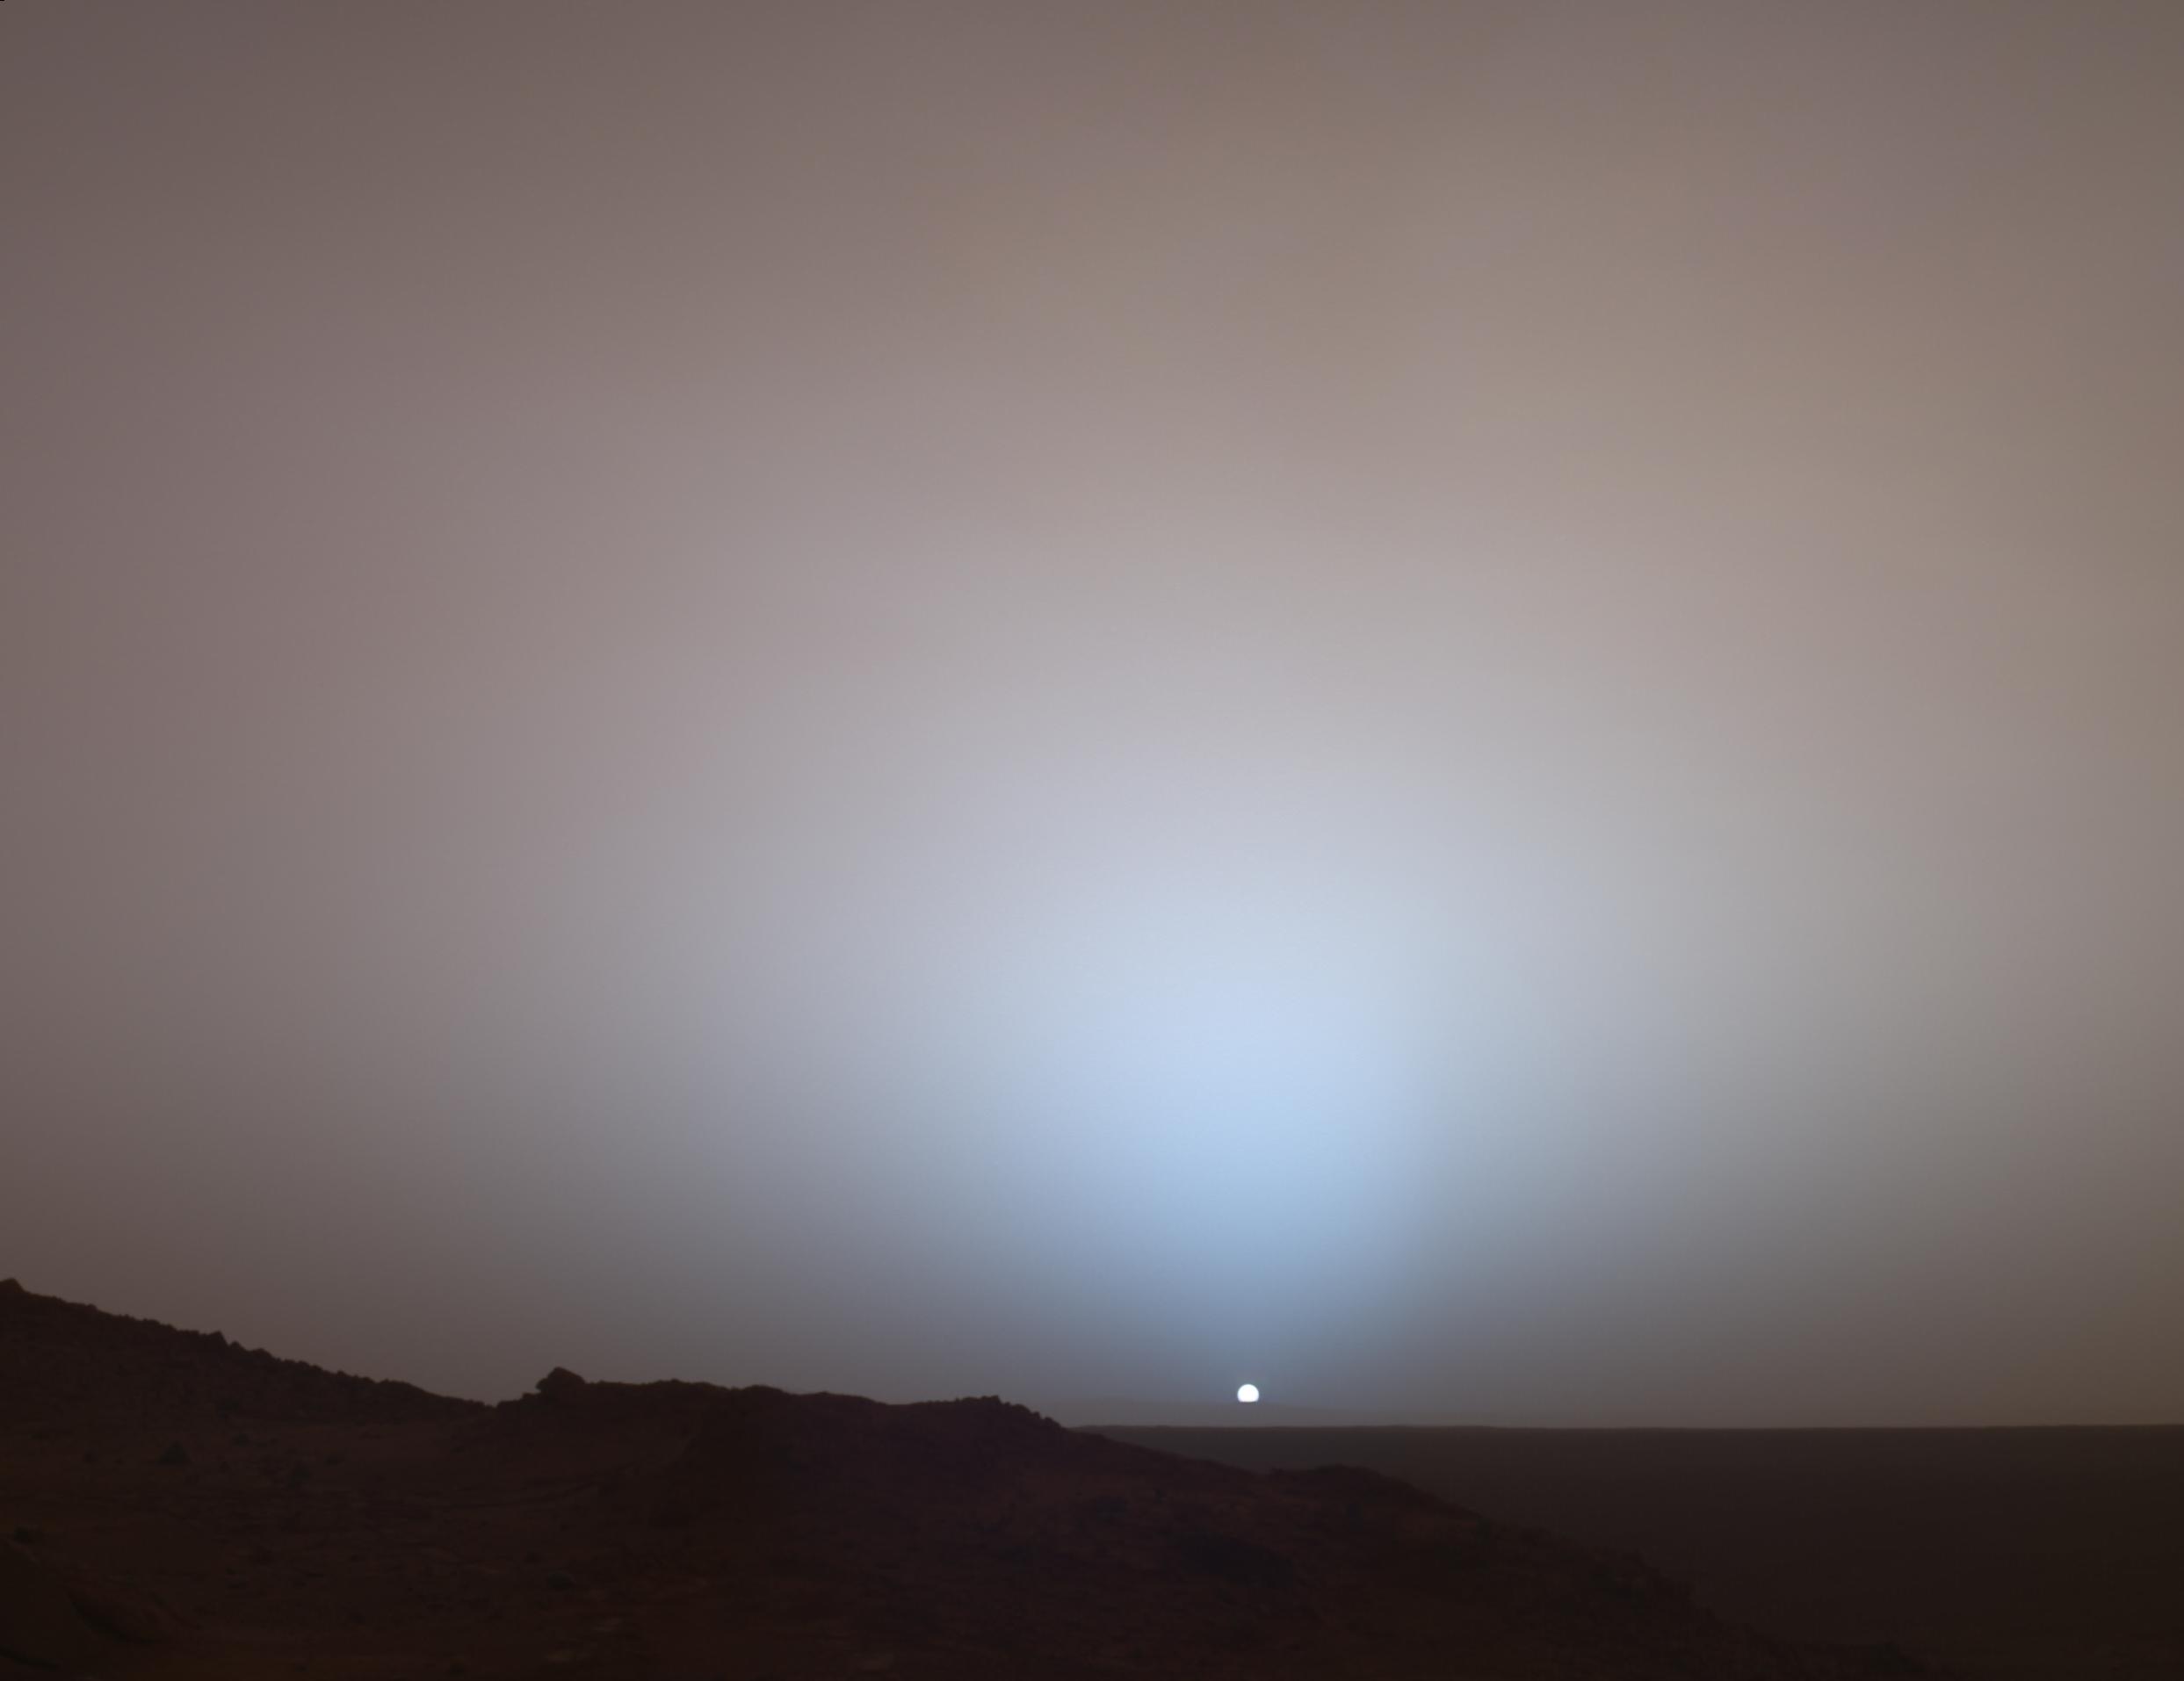 Sunset on Mars viewed by the Spirit rover